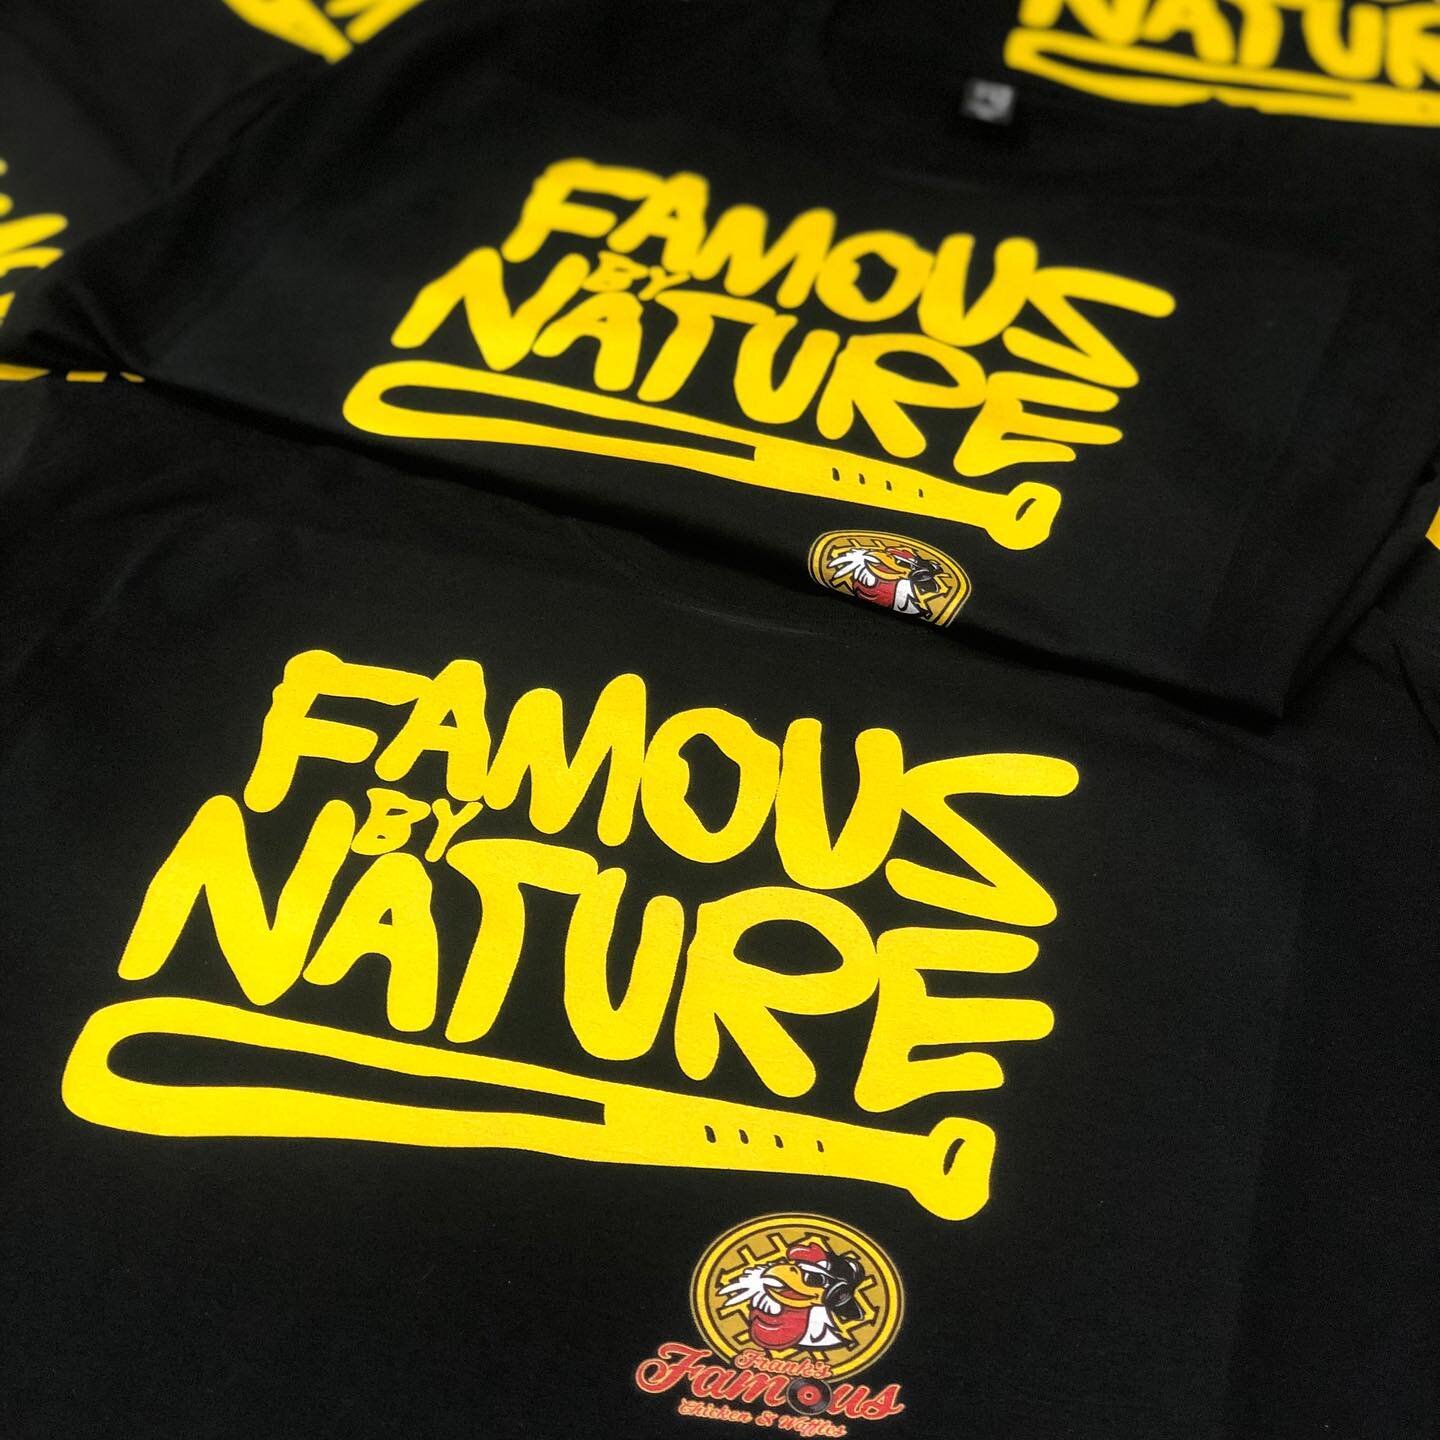 Let us showcase your brand like we did for @franks_famous_chicken_n_waffle 🔥🔥🔥